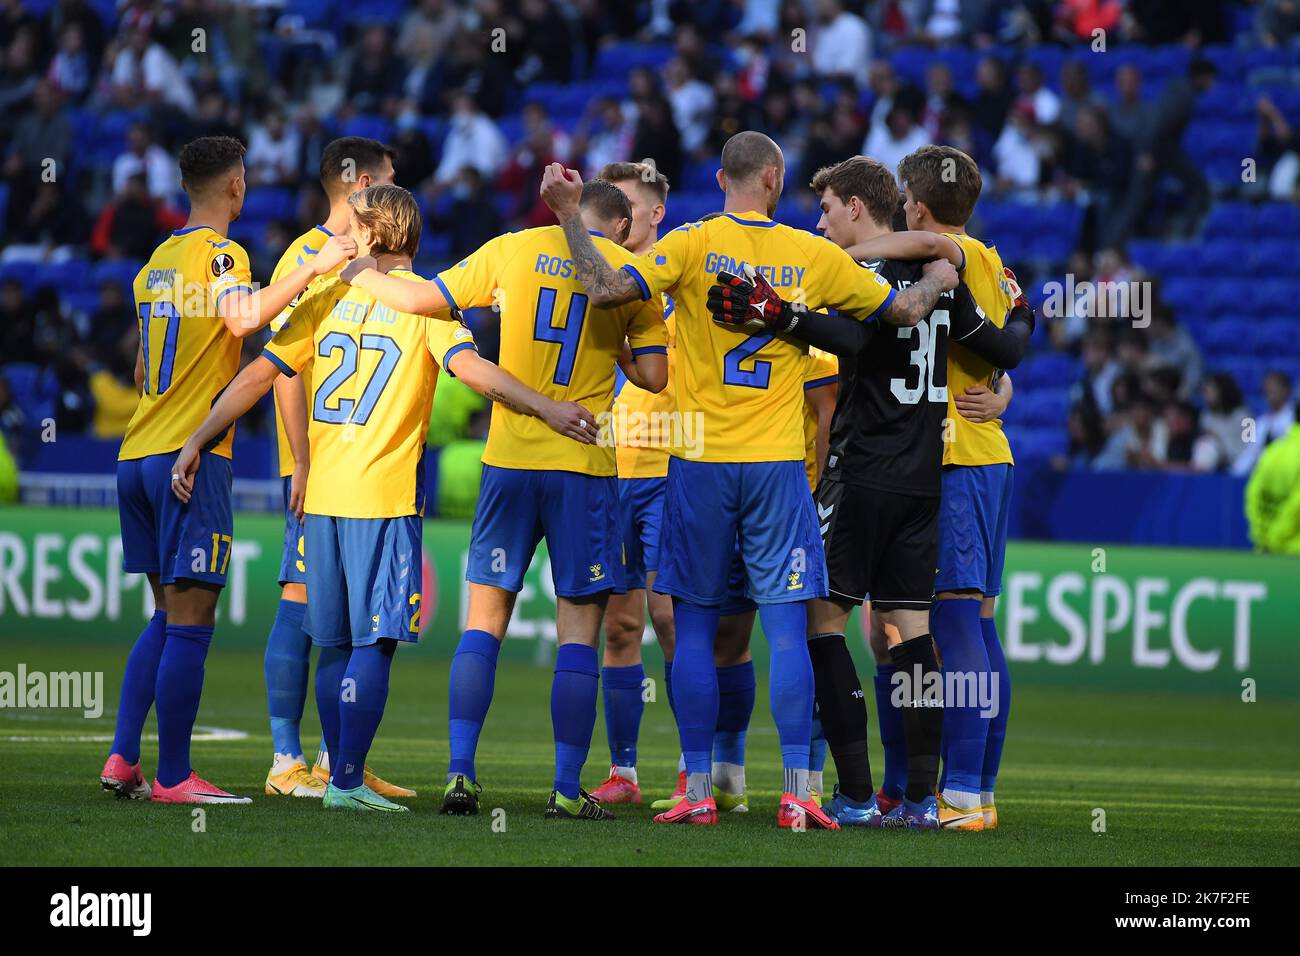 ©Mourad ALLILI/MAXPPP - Team Brondby IF during the UEFA Europa LIgue group A football match between Olympique Lyonnais and Brondby IF at the the Groupama stadium in Decines-Charpieu near Lyon, central eastern France on September 30, 2021. Stock Photo